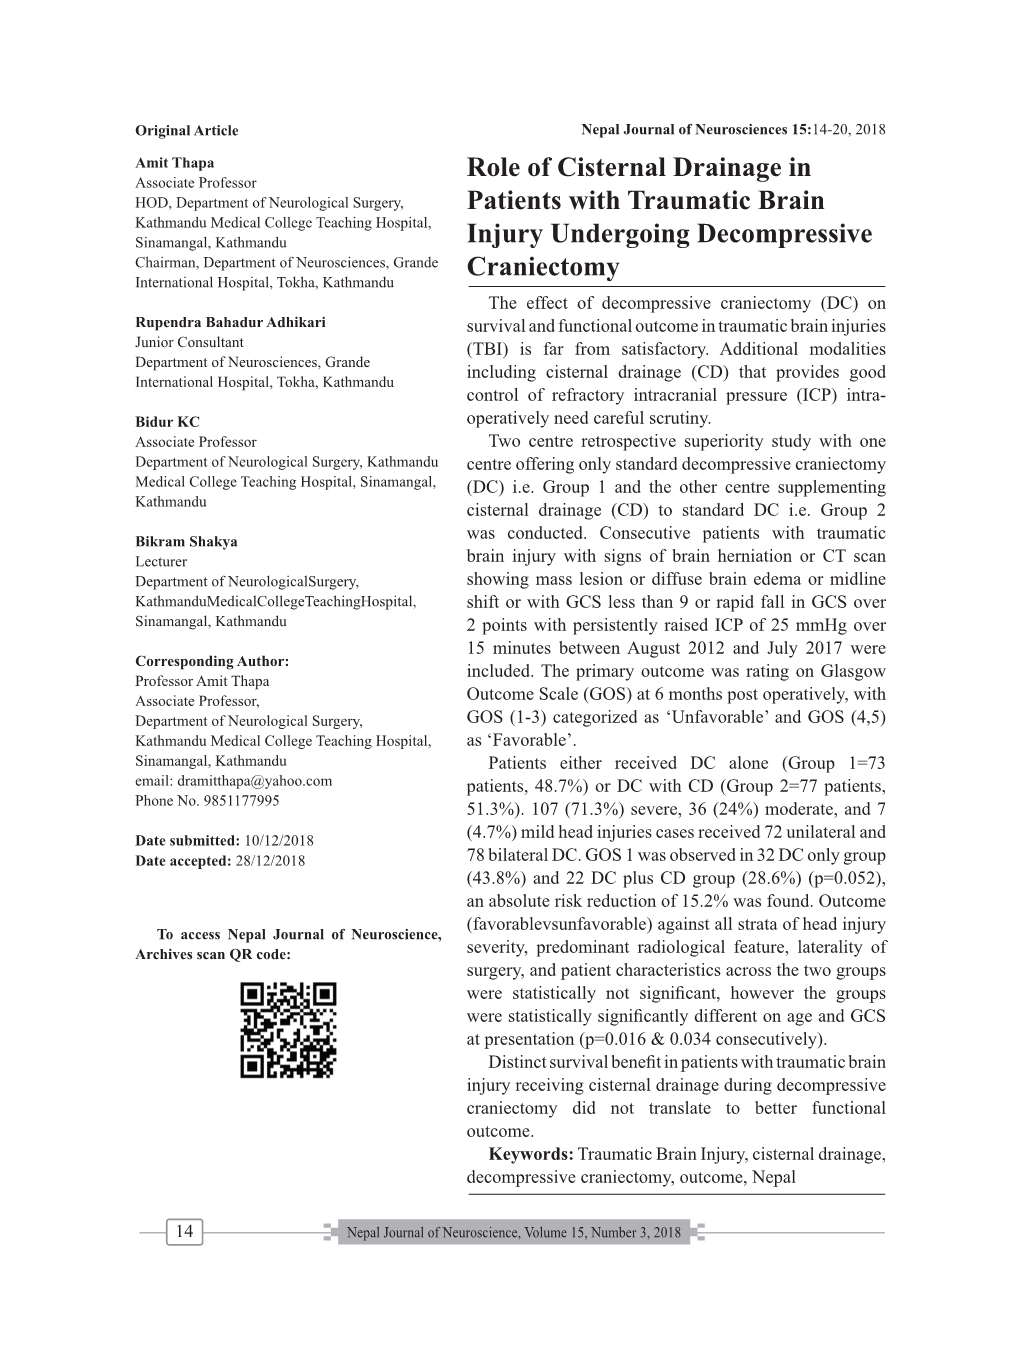 Role of Cisternal Drainage in Patients with Traumatic Brain Injury